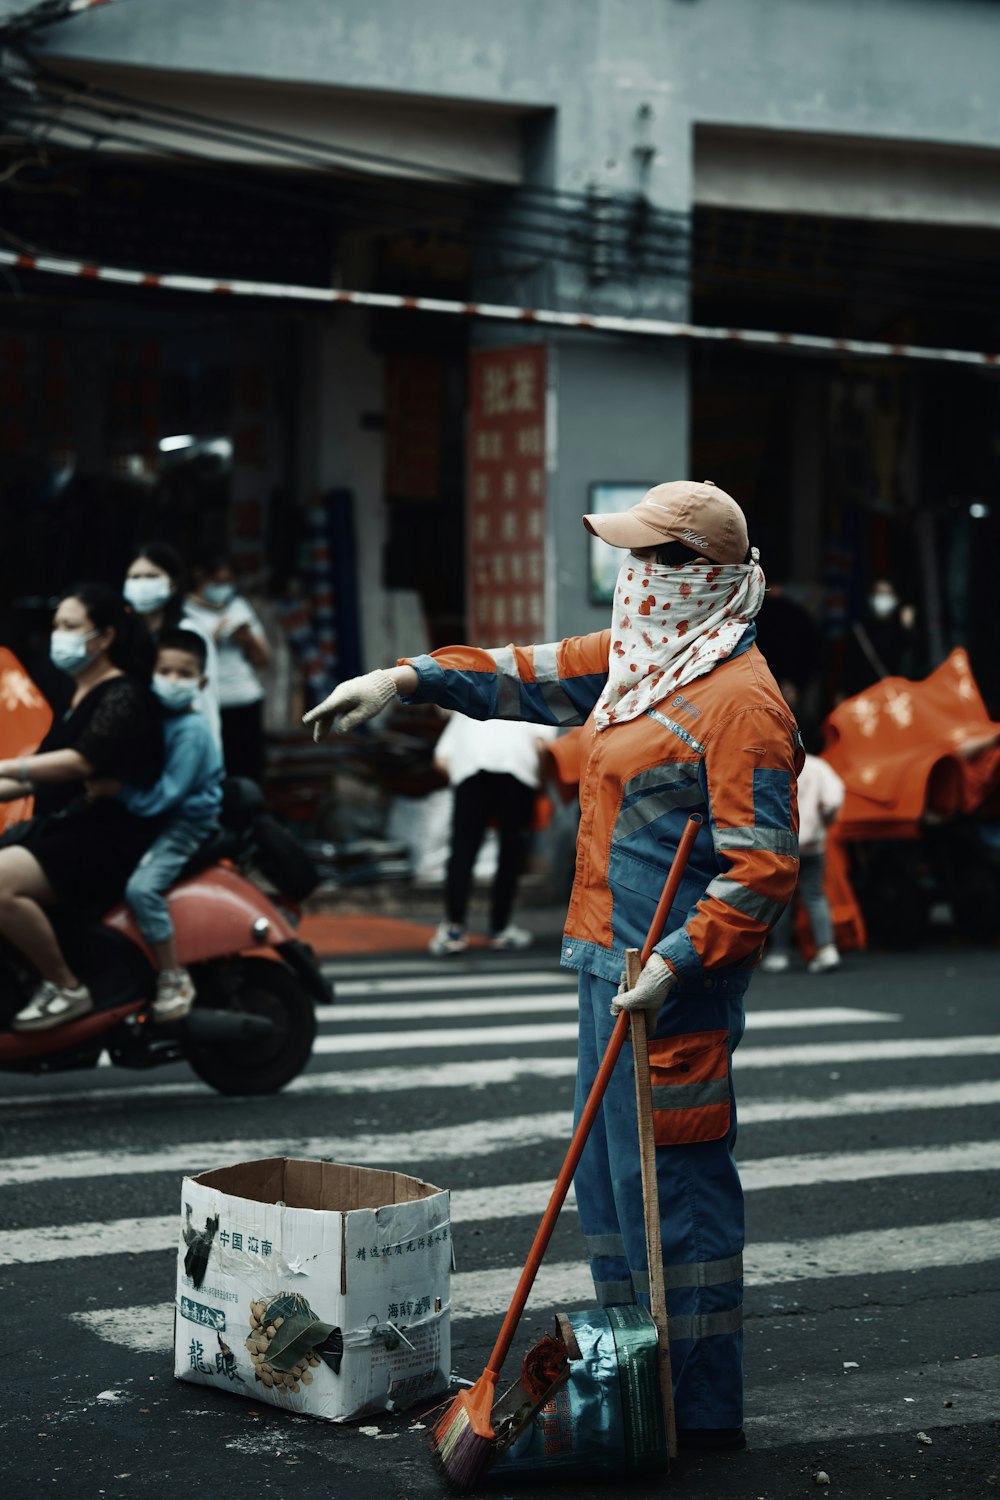 a person in an orange and blue outfit with a broom